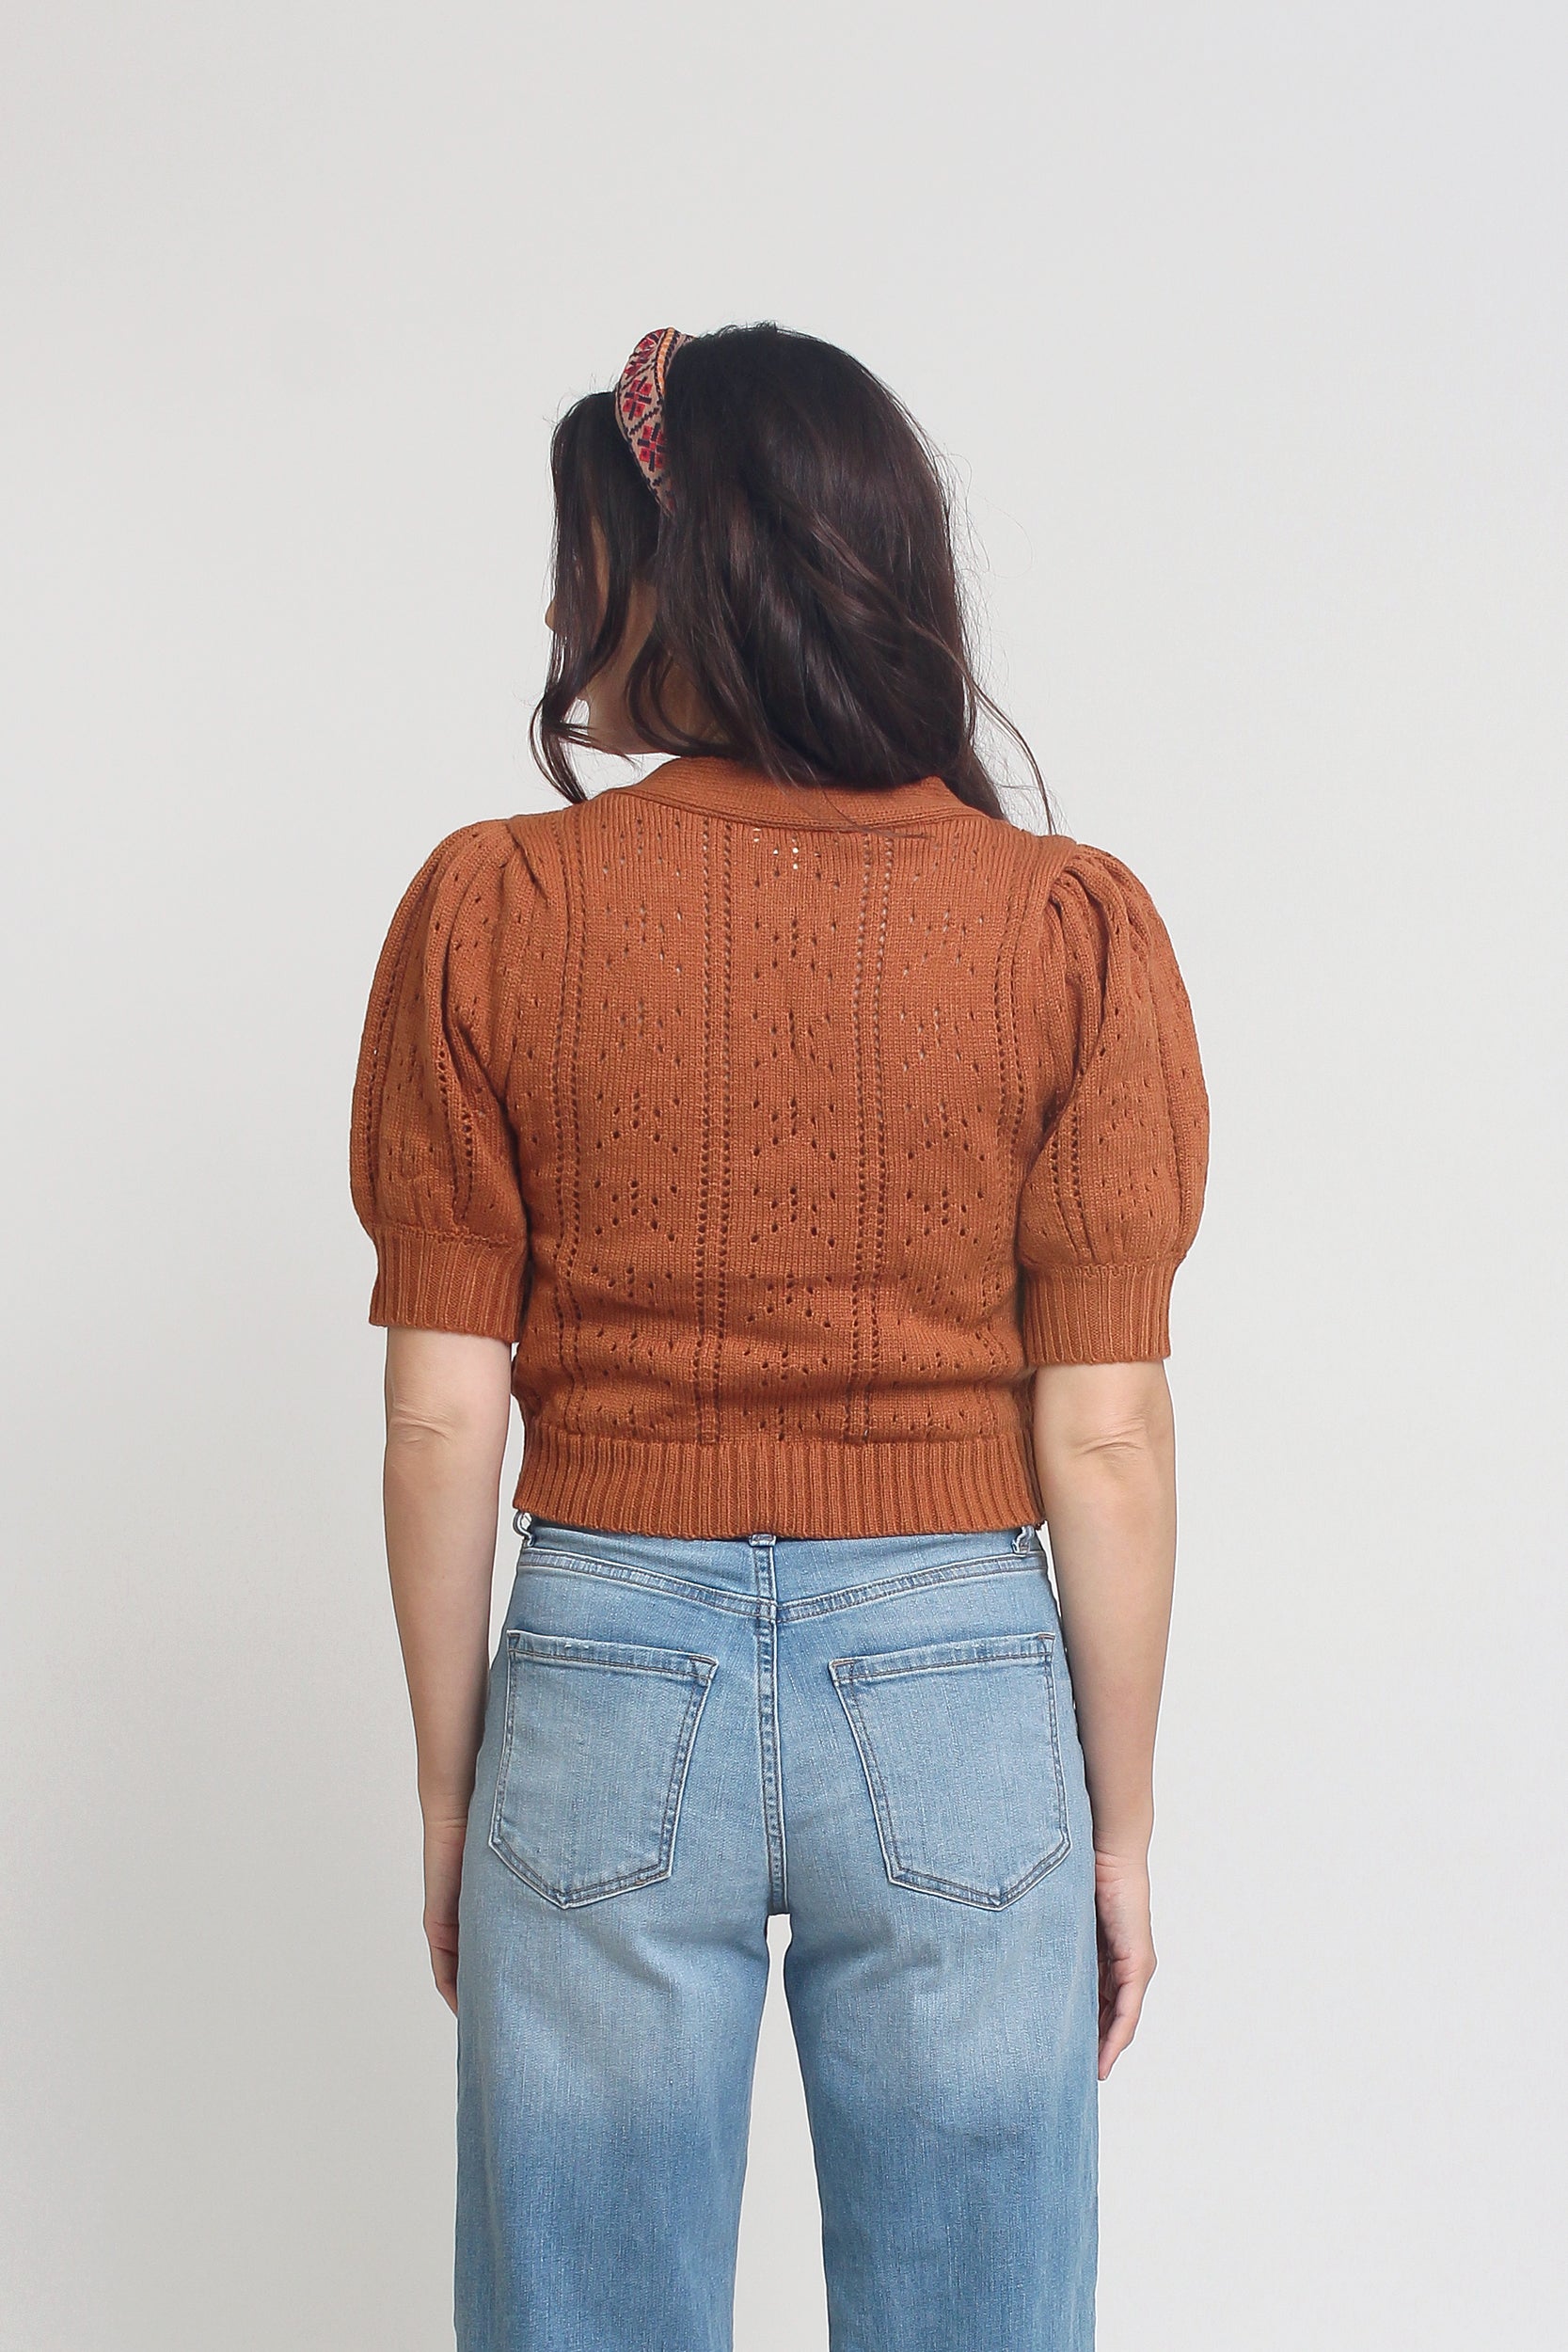 Puff sleeve cardigan with eyelet detail, in Gingerbread. Image 10